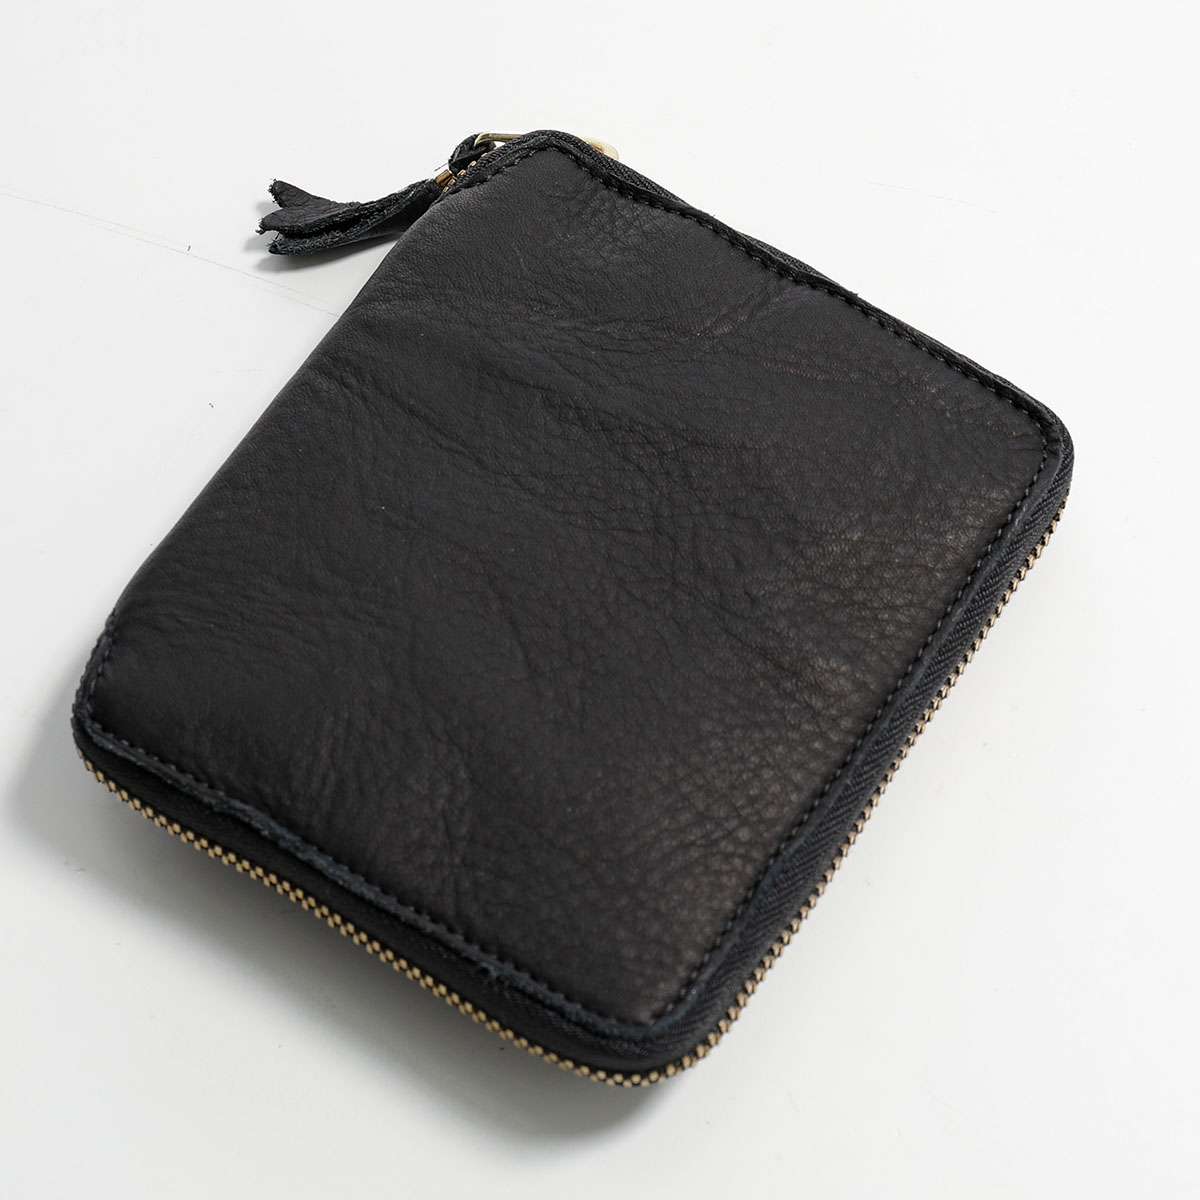 COMME des GARCONS コムデギャルソン 二つ折り財布 WASHED WALLET SA2100WW メンズ ラウンドファスナー 小銭入れあり レザー カラー4色｜s-musee｜02